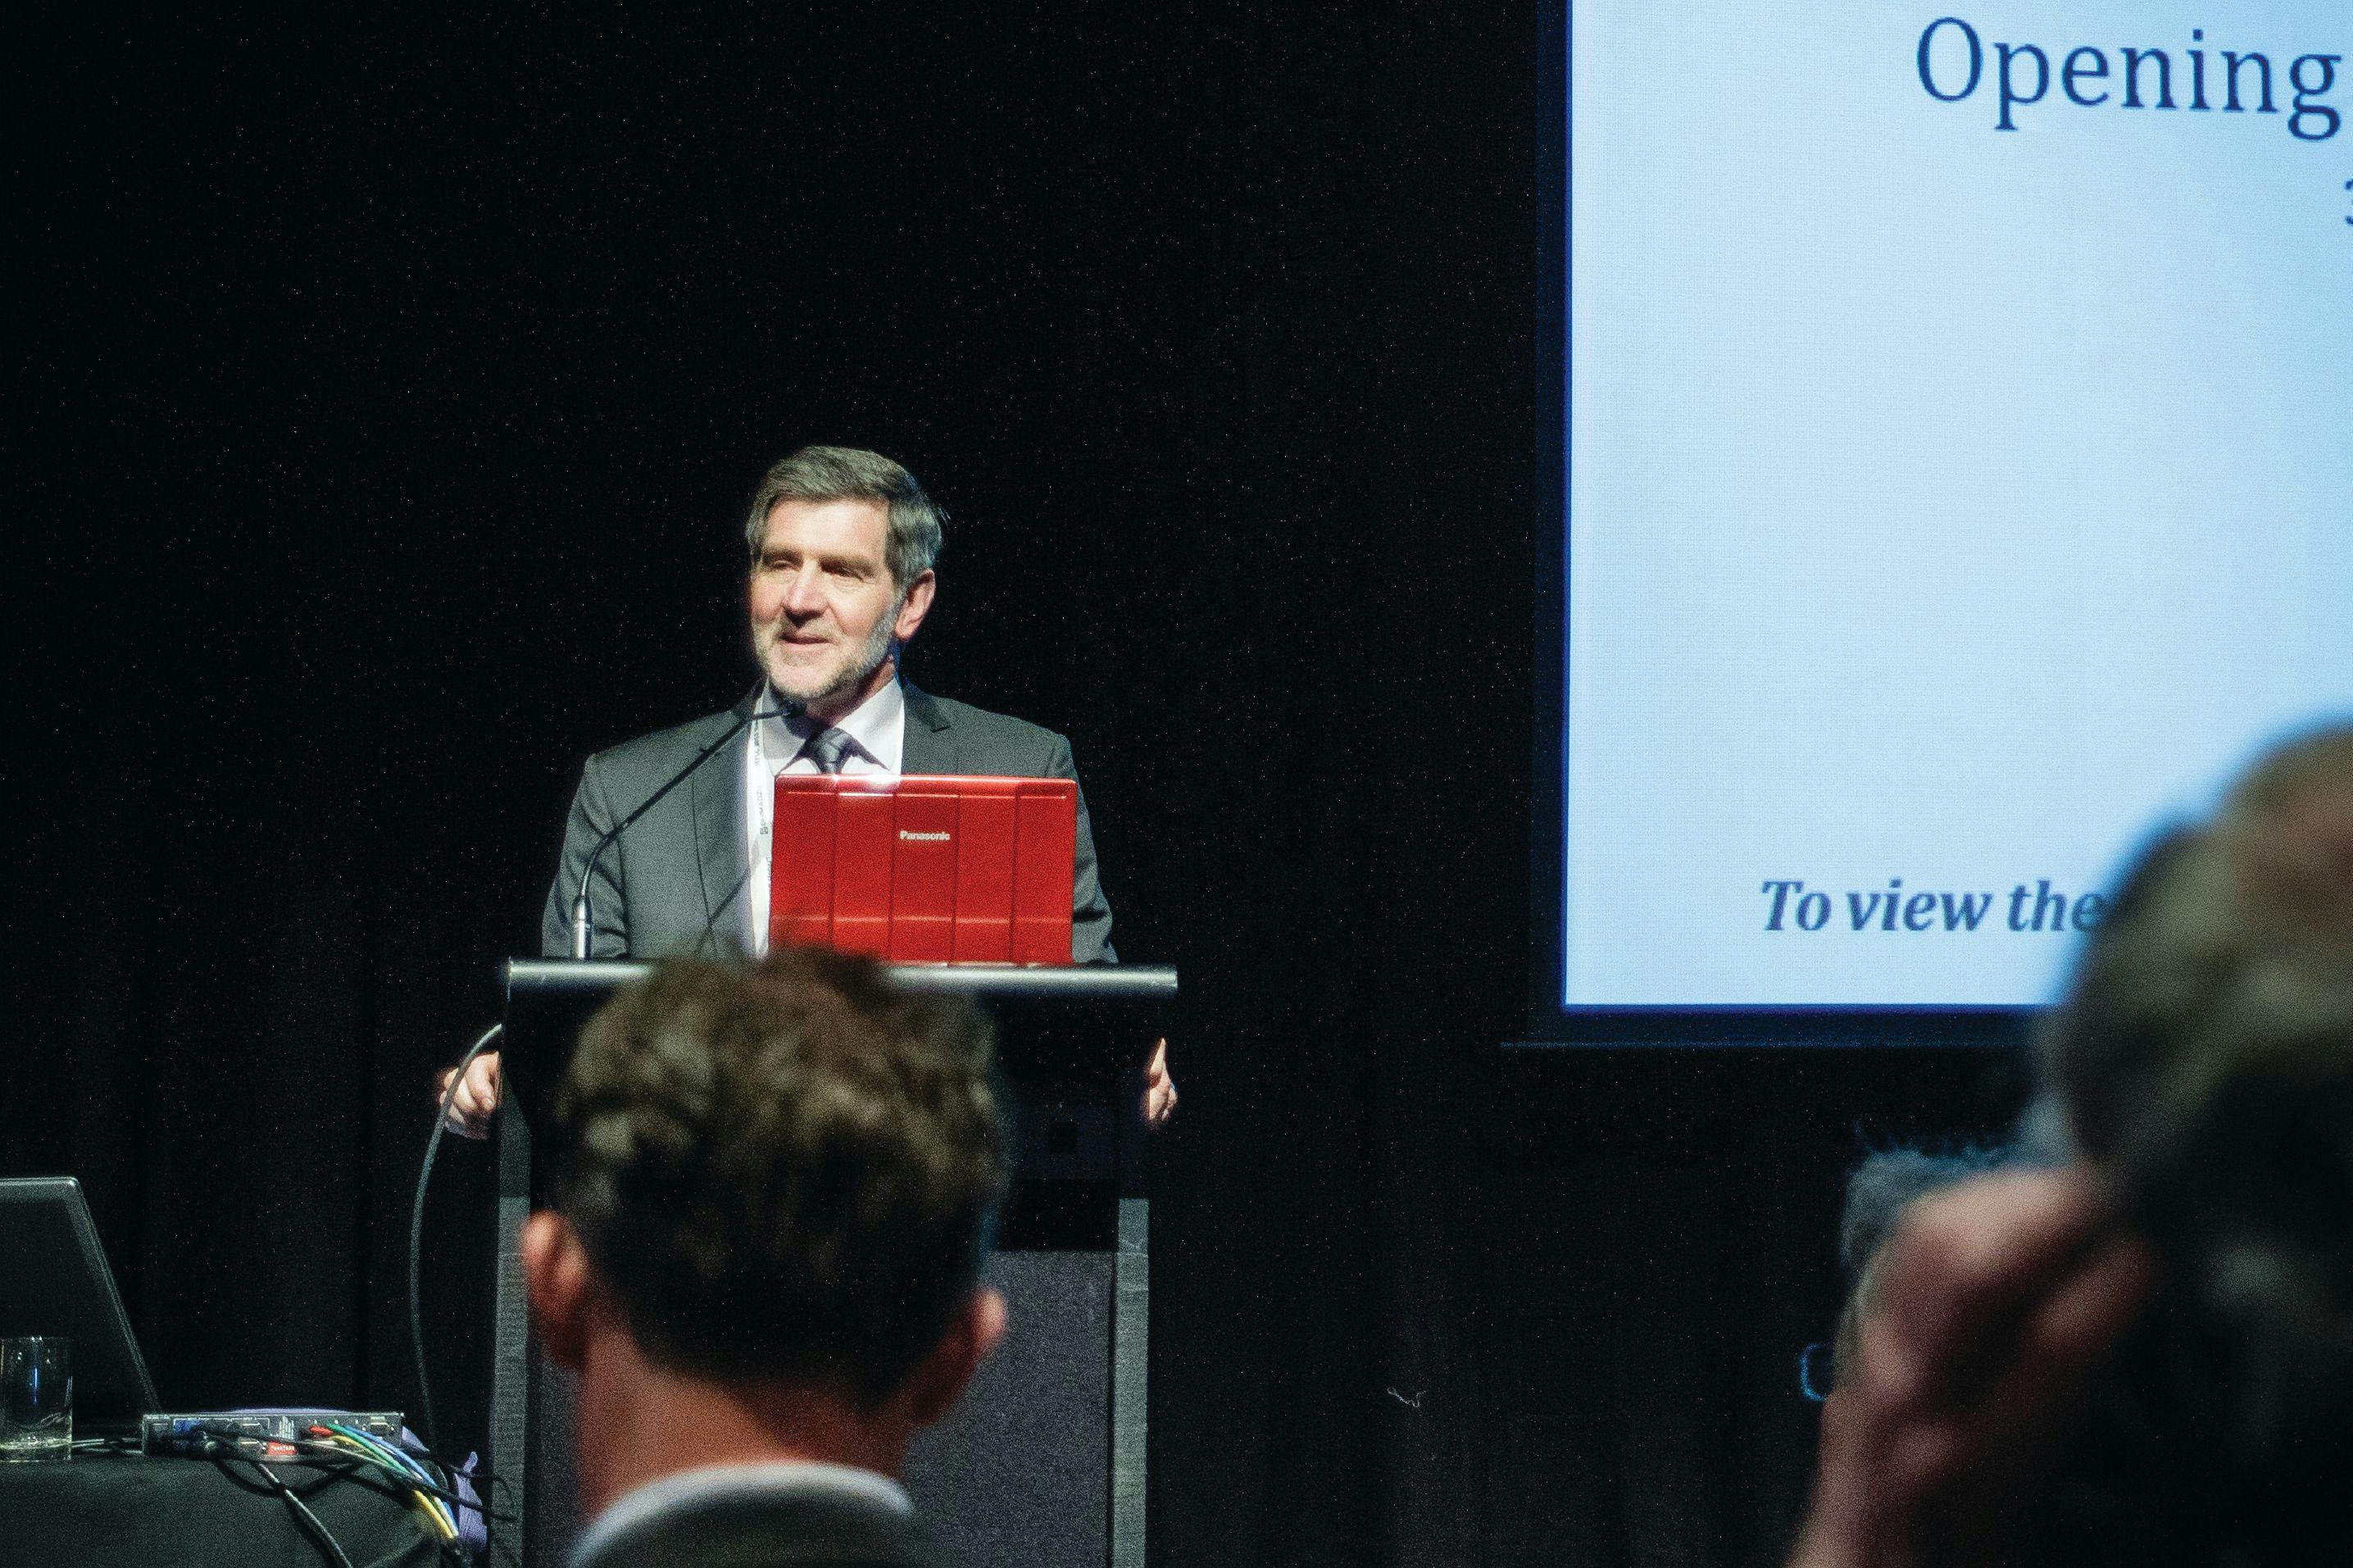 Haddad presenting at the HPLC 2013 conference in Hobart. Image and caption courtesy of Emily Hilder.